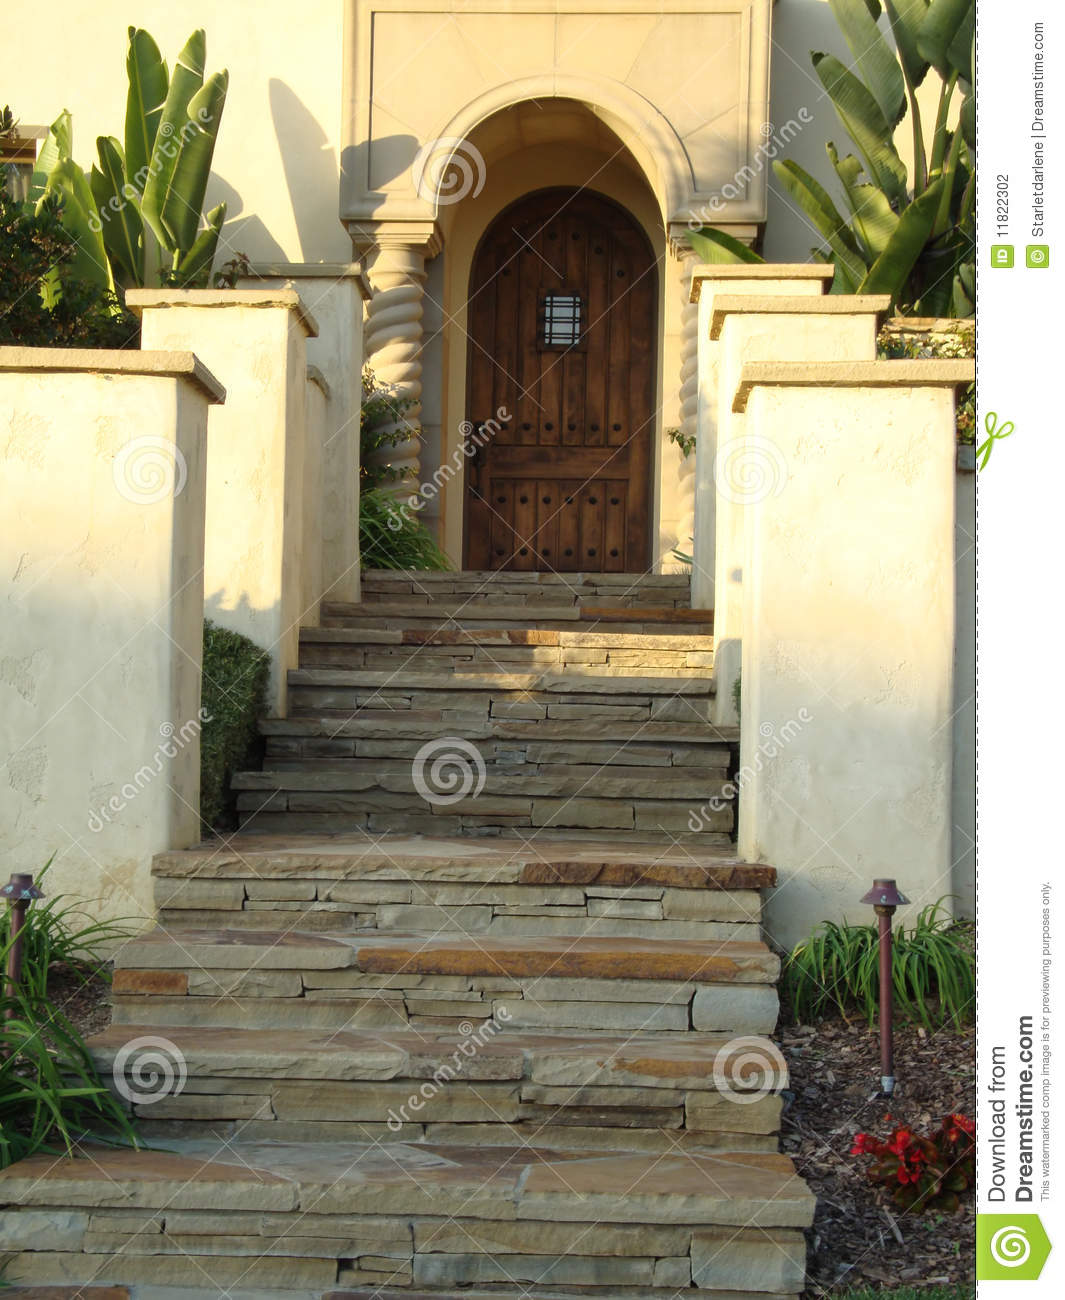 Slate Steps Leading Up To A Beautiful Arched Entry Way And Front Door